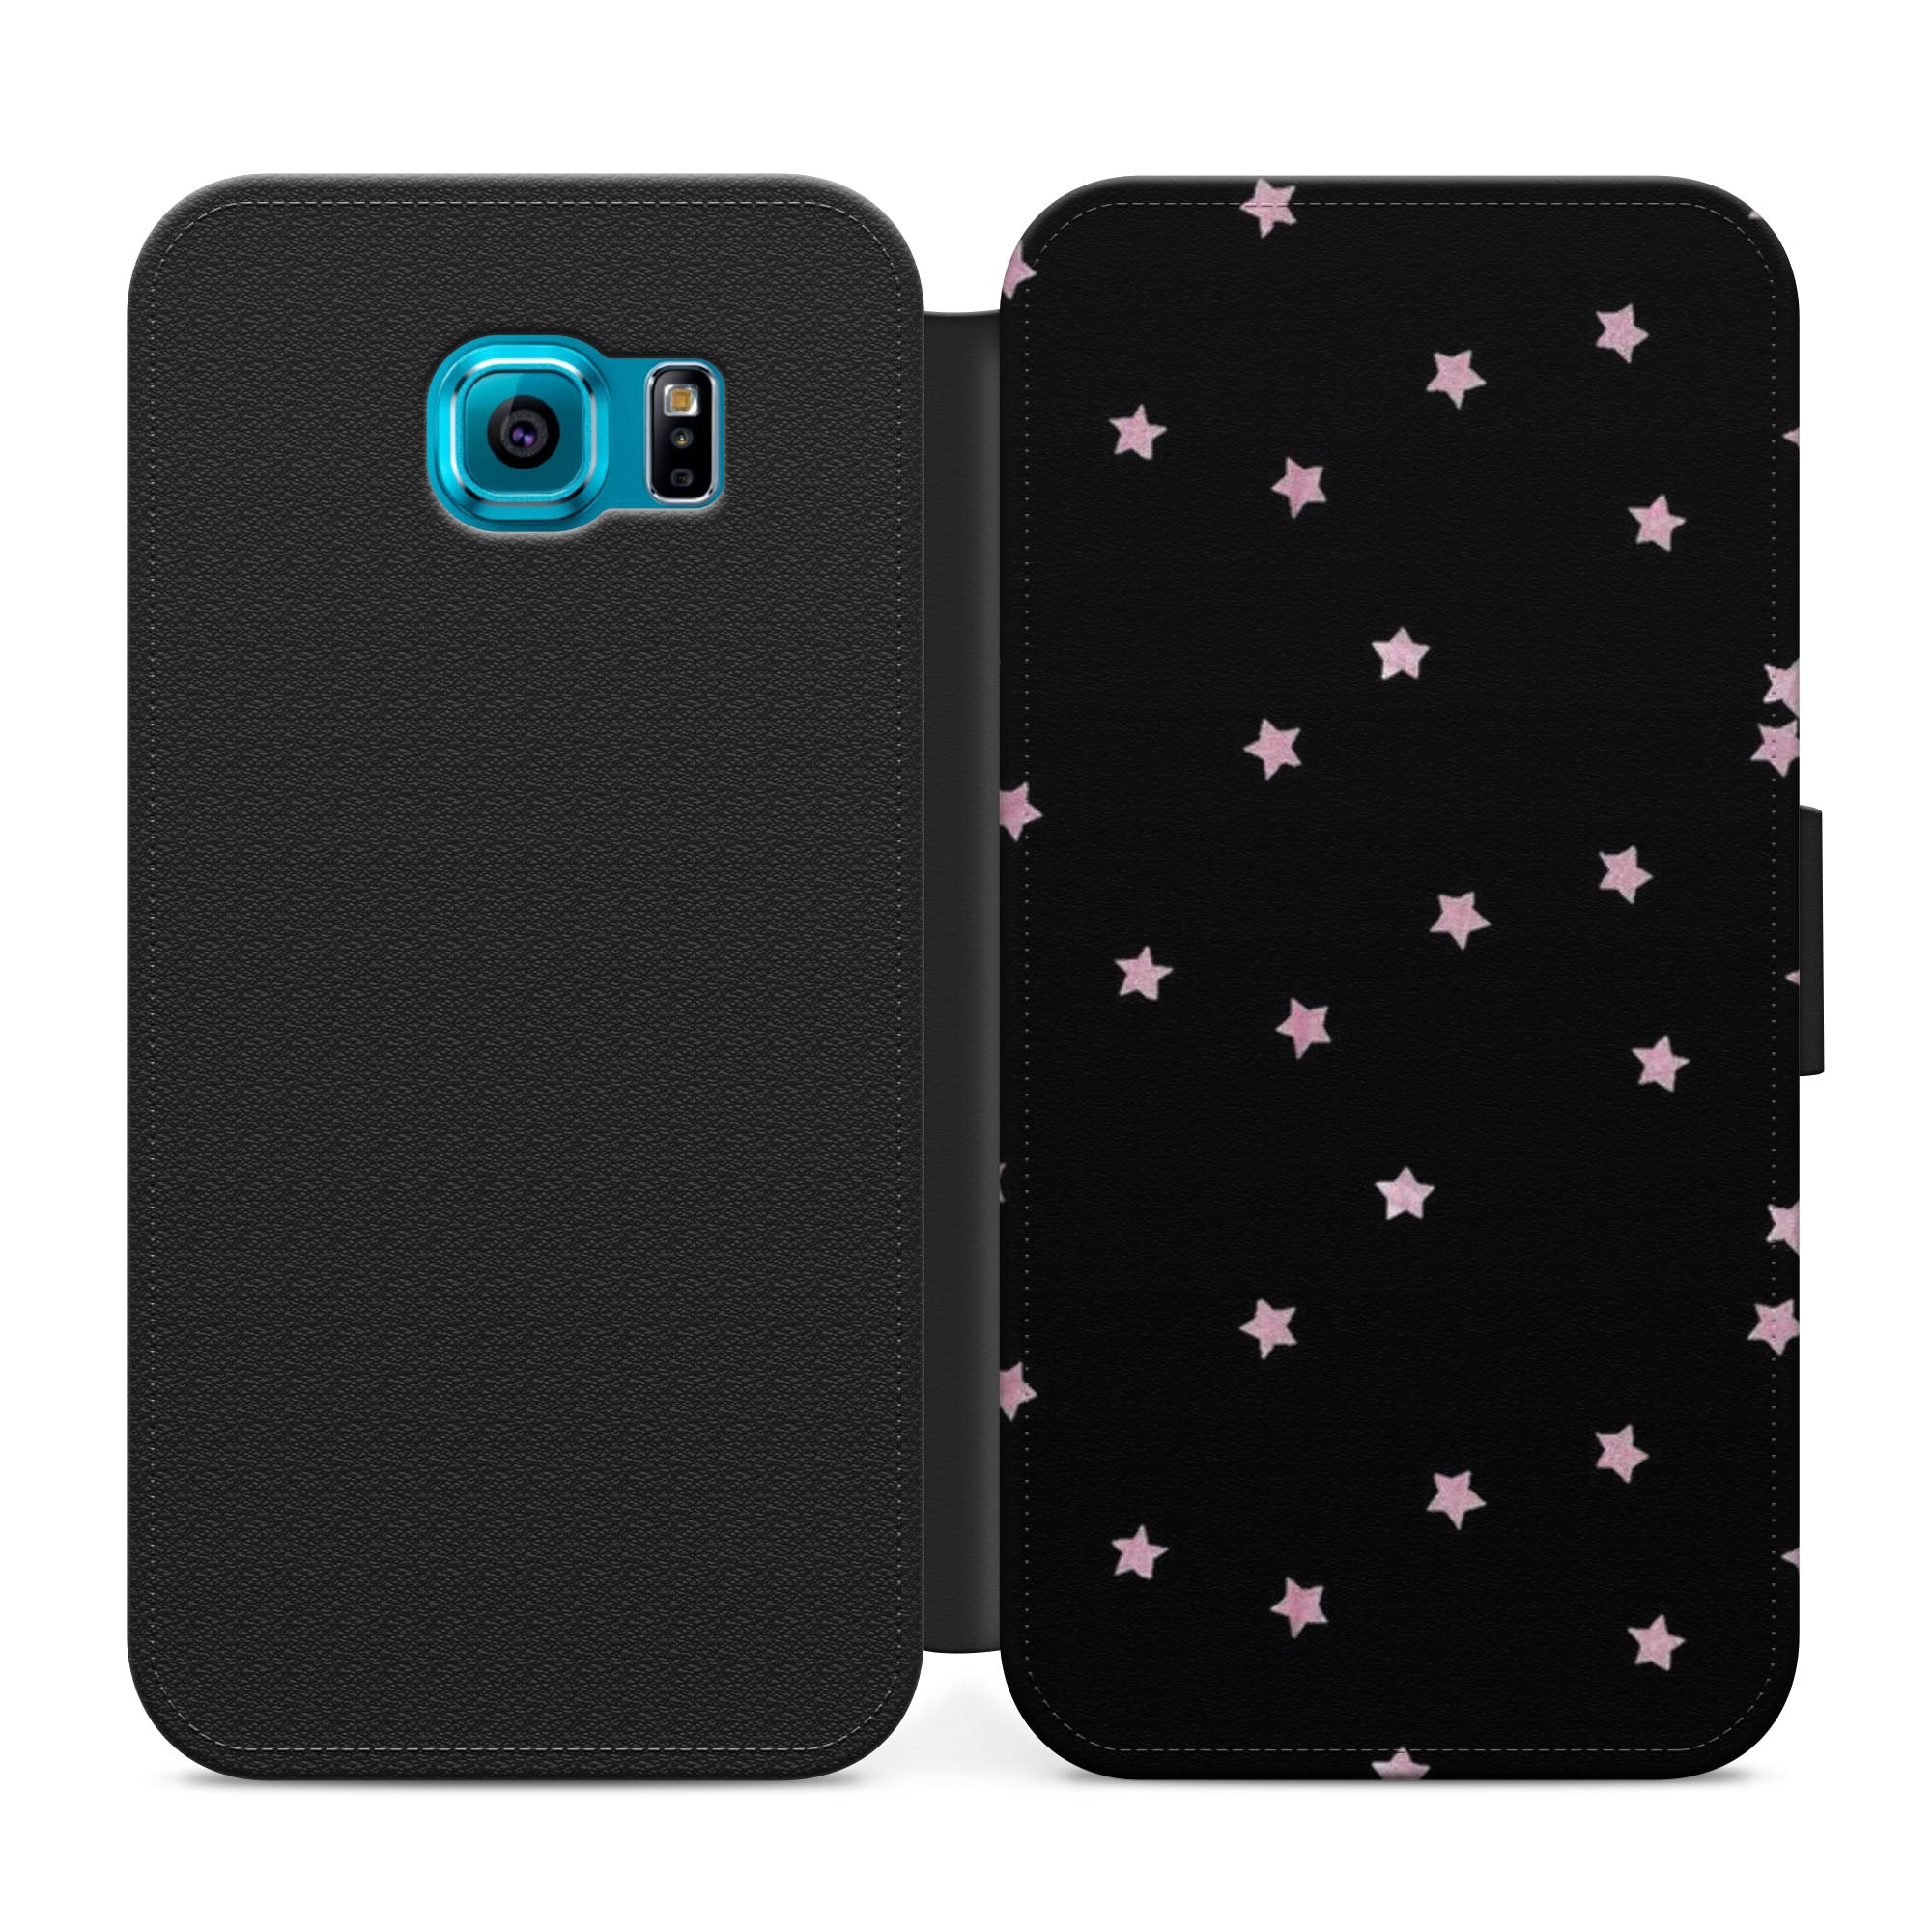 Cute Stars Faux Leather Flip Case Wallet for iPhone / Samsung